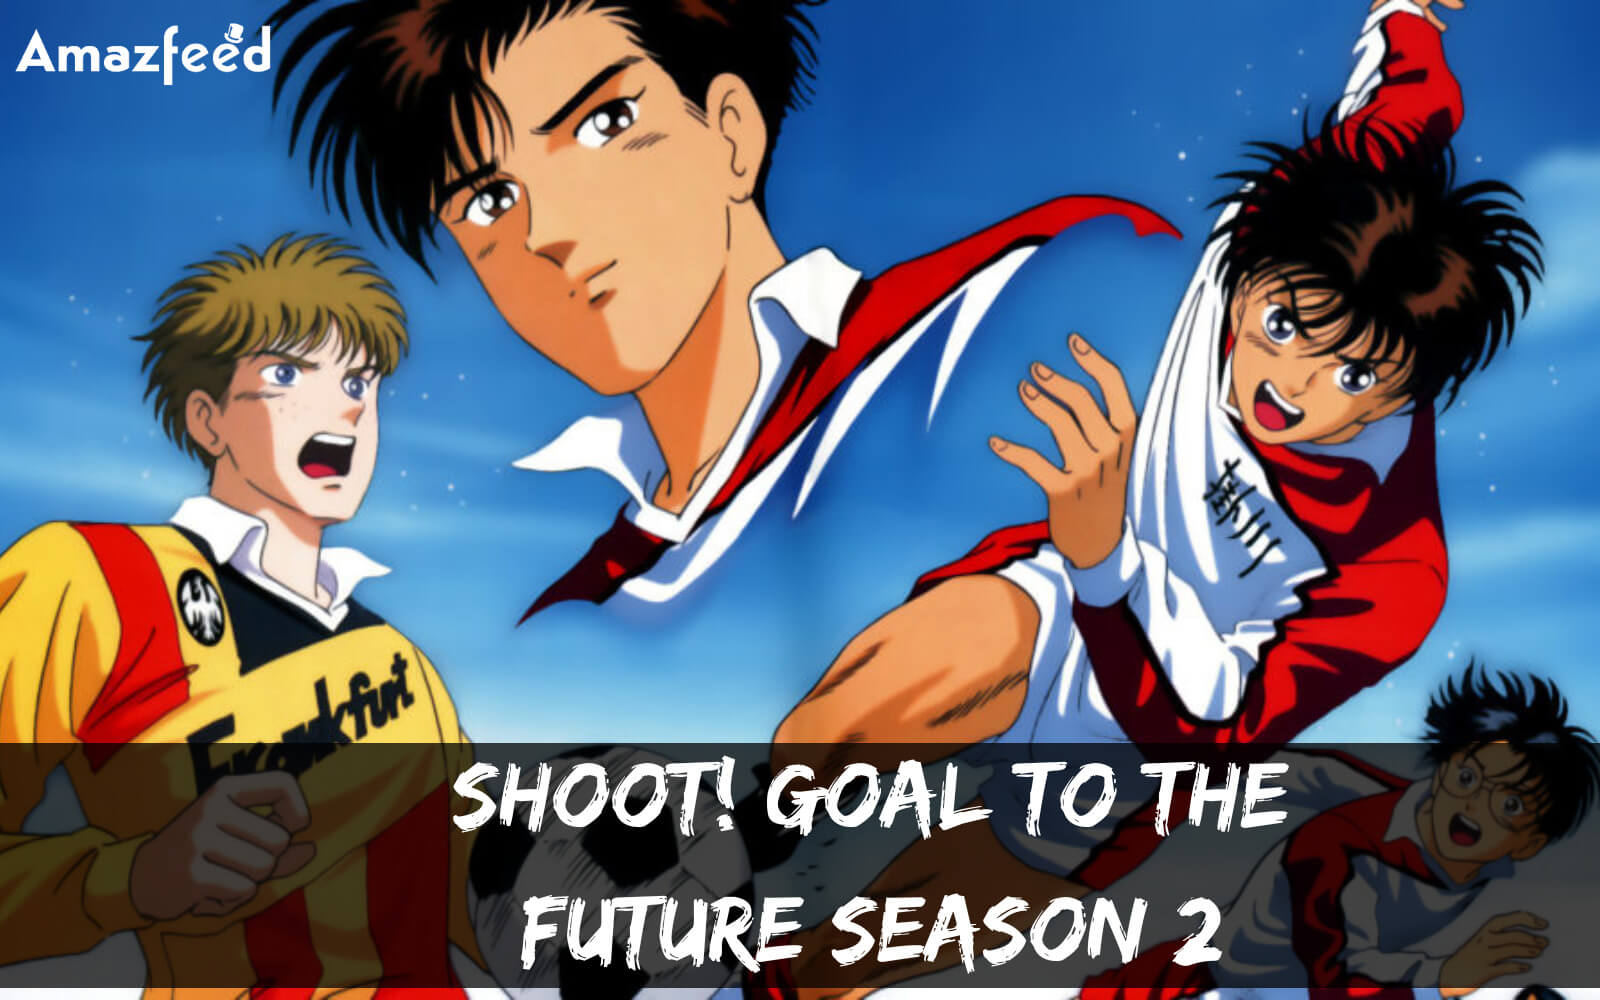 Shoot! Goal to the Future Ep 9 Release Date, Preview